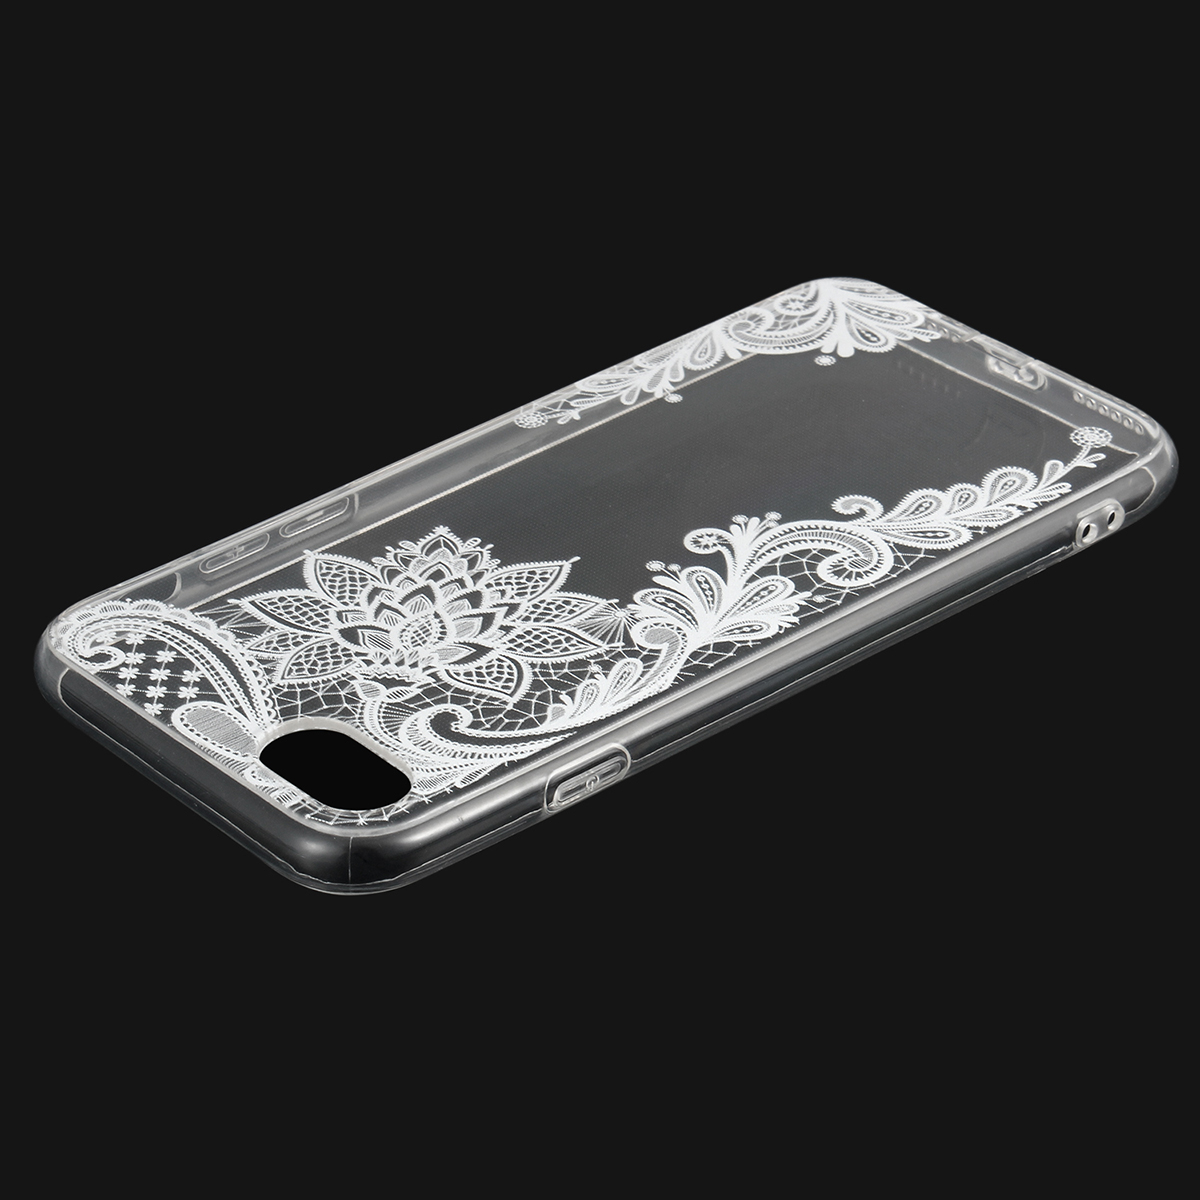 New Slim Soft TPU Transparent Printing Phone Case for iPhone 7 - White Ceiling Decorative